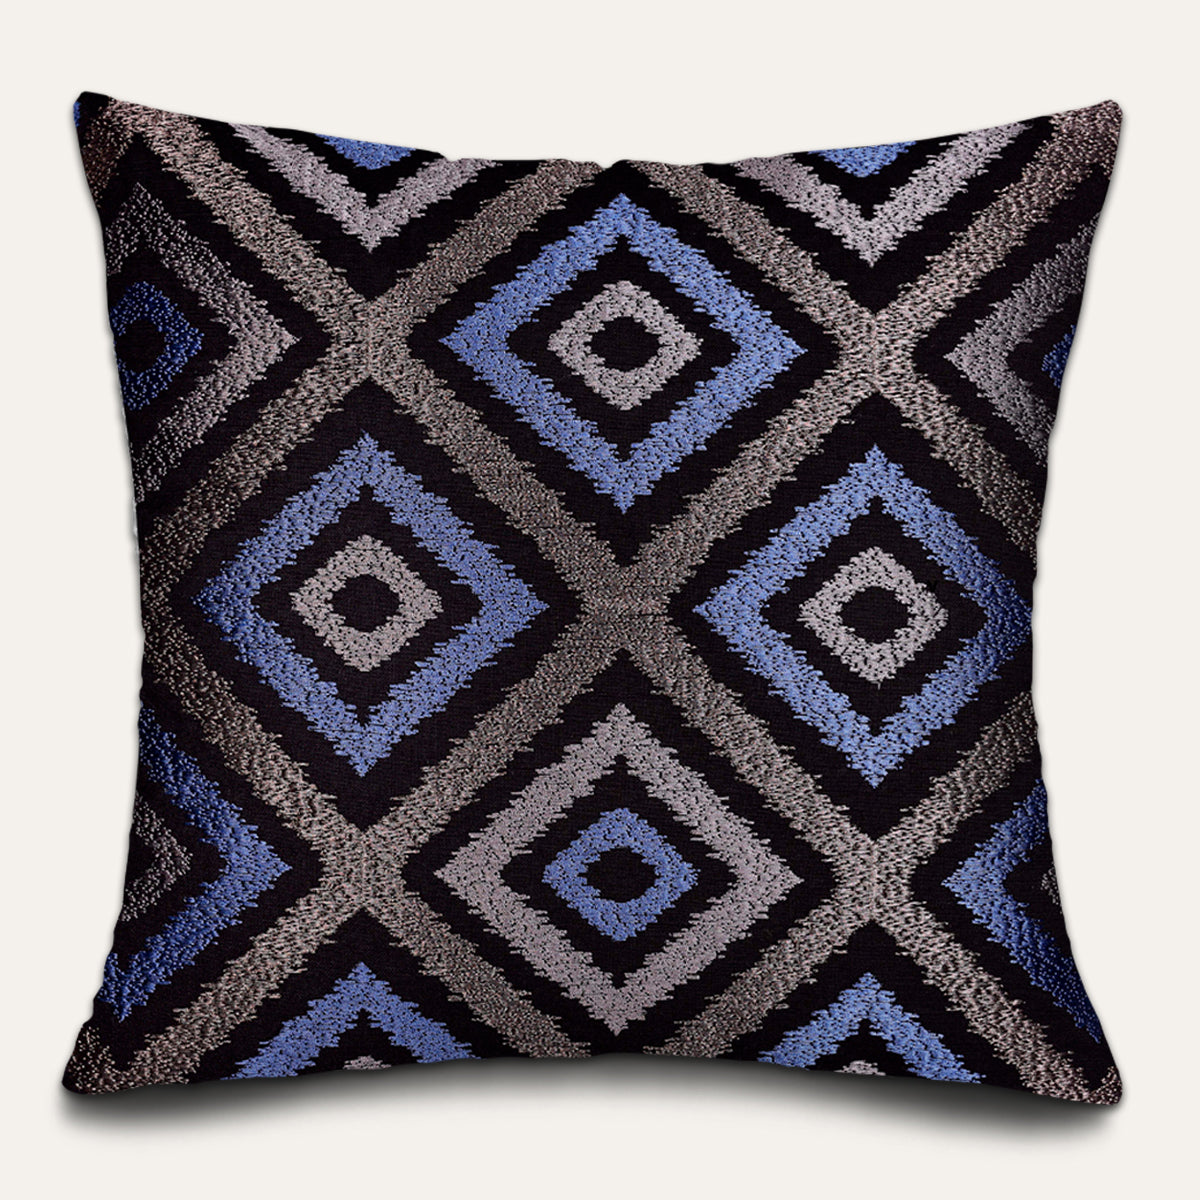 Blue Gray Throw Pillow Covers - 20 x 20 inches - Decozen